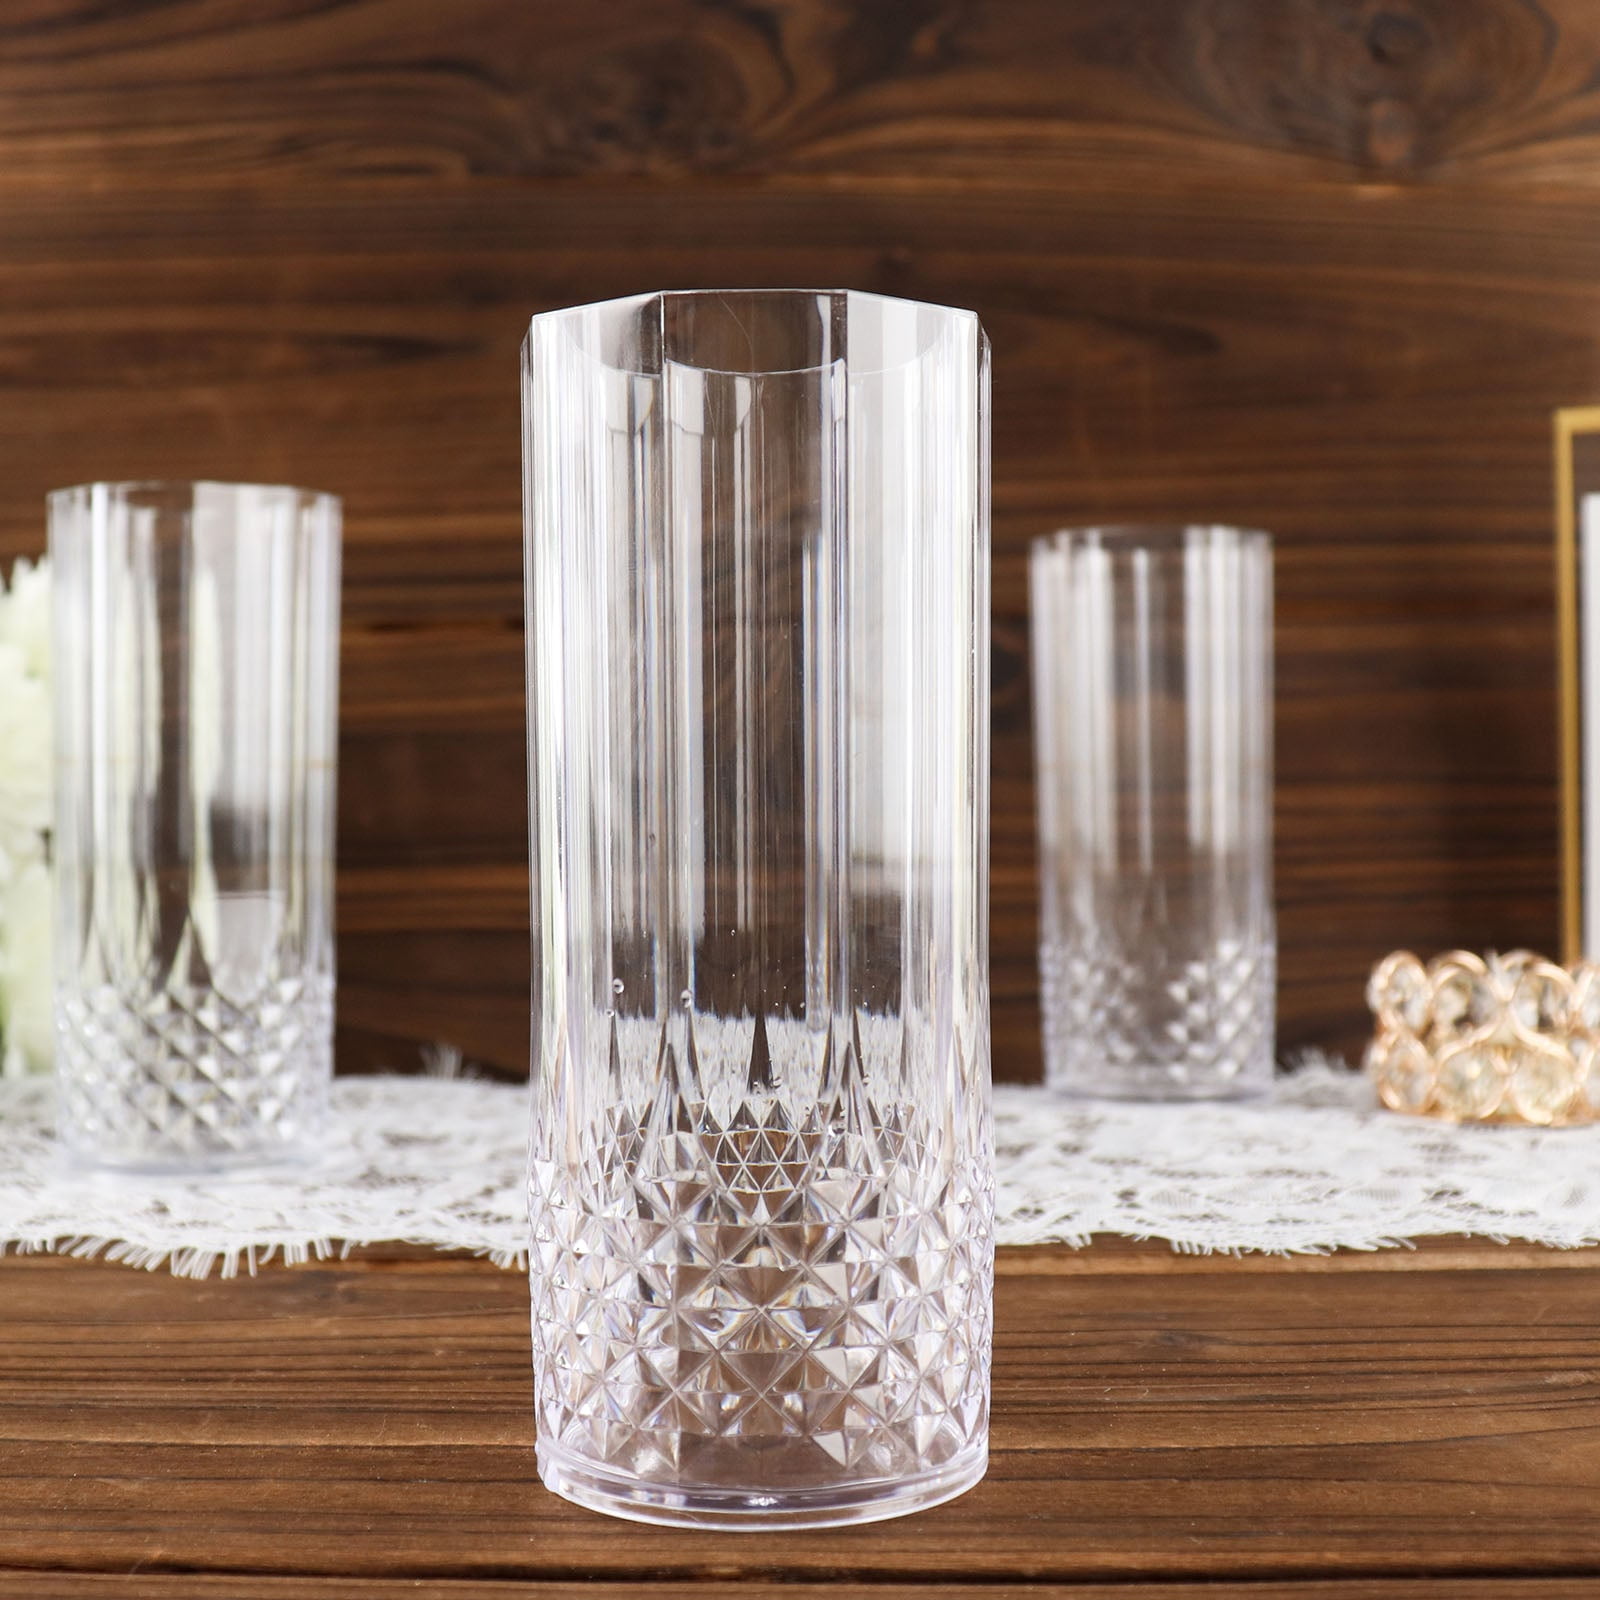 Claplante Crystal Highball Glasses, Set of 8 Glass Drinking Glasses, 11 oz  Durable Drinkware Cups fo…See more Claplante Crystal Highball Glasses, Set